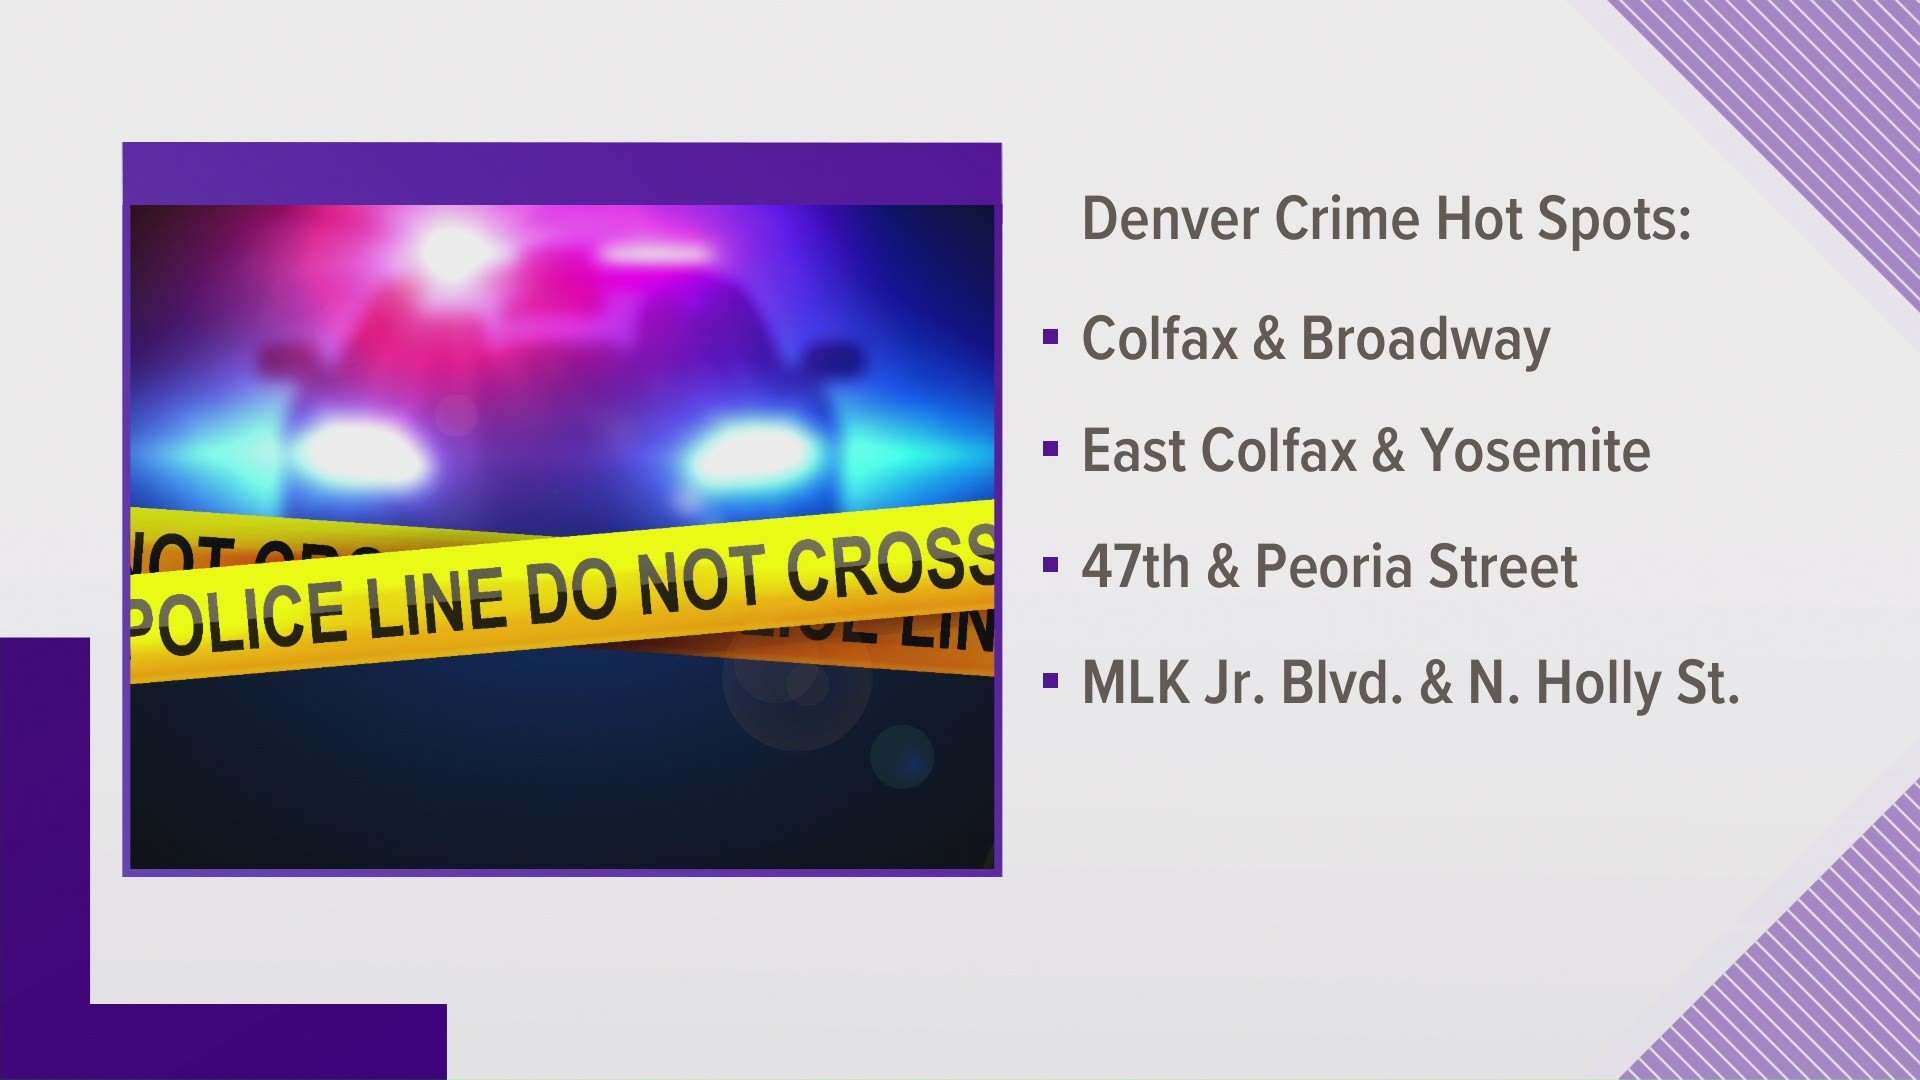 Five hotspots for crime in the Denver area make up 26% of homicides and aggravated assaults.